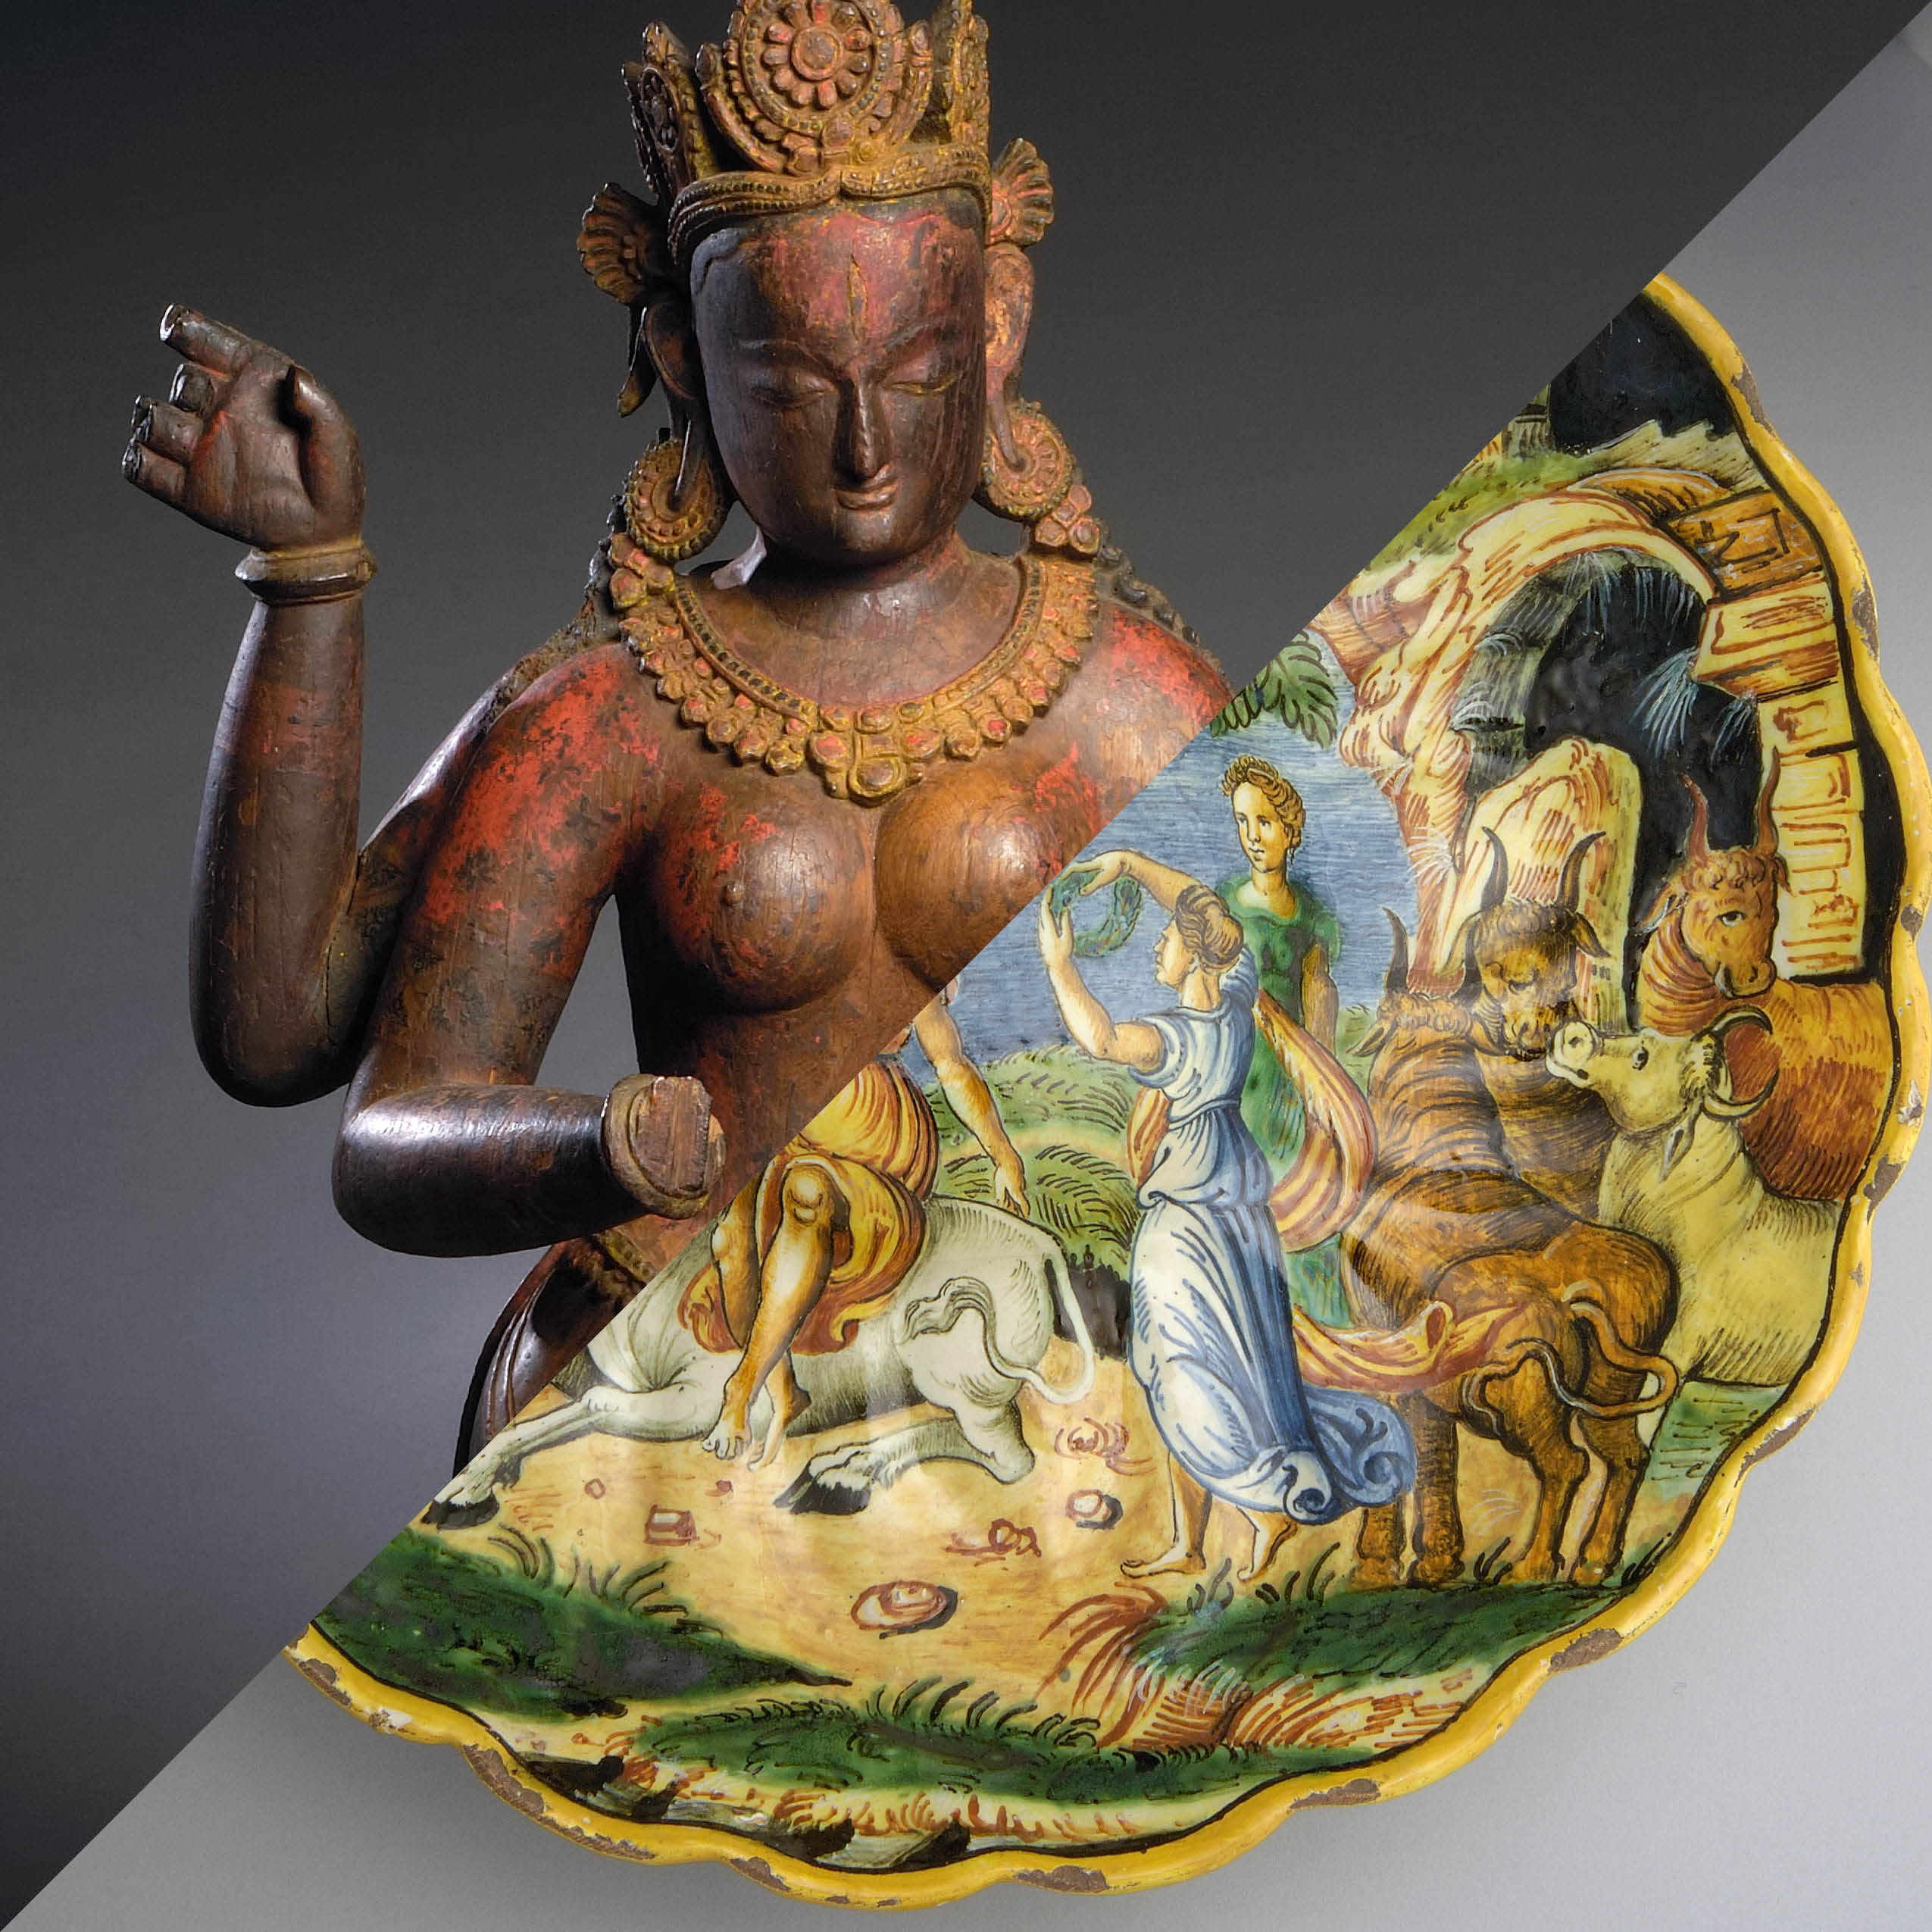 Photograph combining images of two art works side by side: a wooden Bhrikuti sculpture and a painted dish featuring Europa and the Bull.